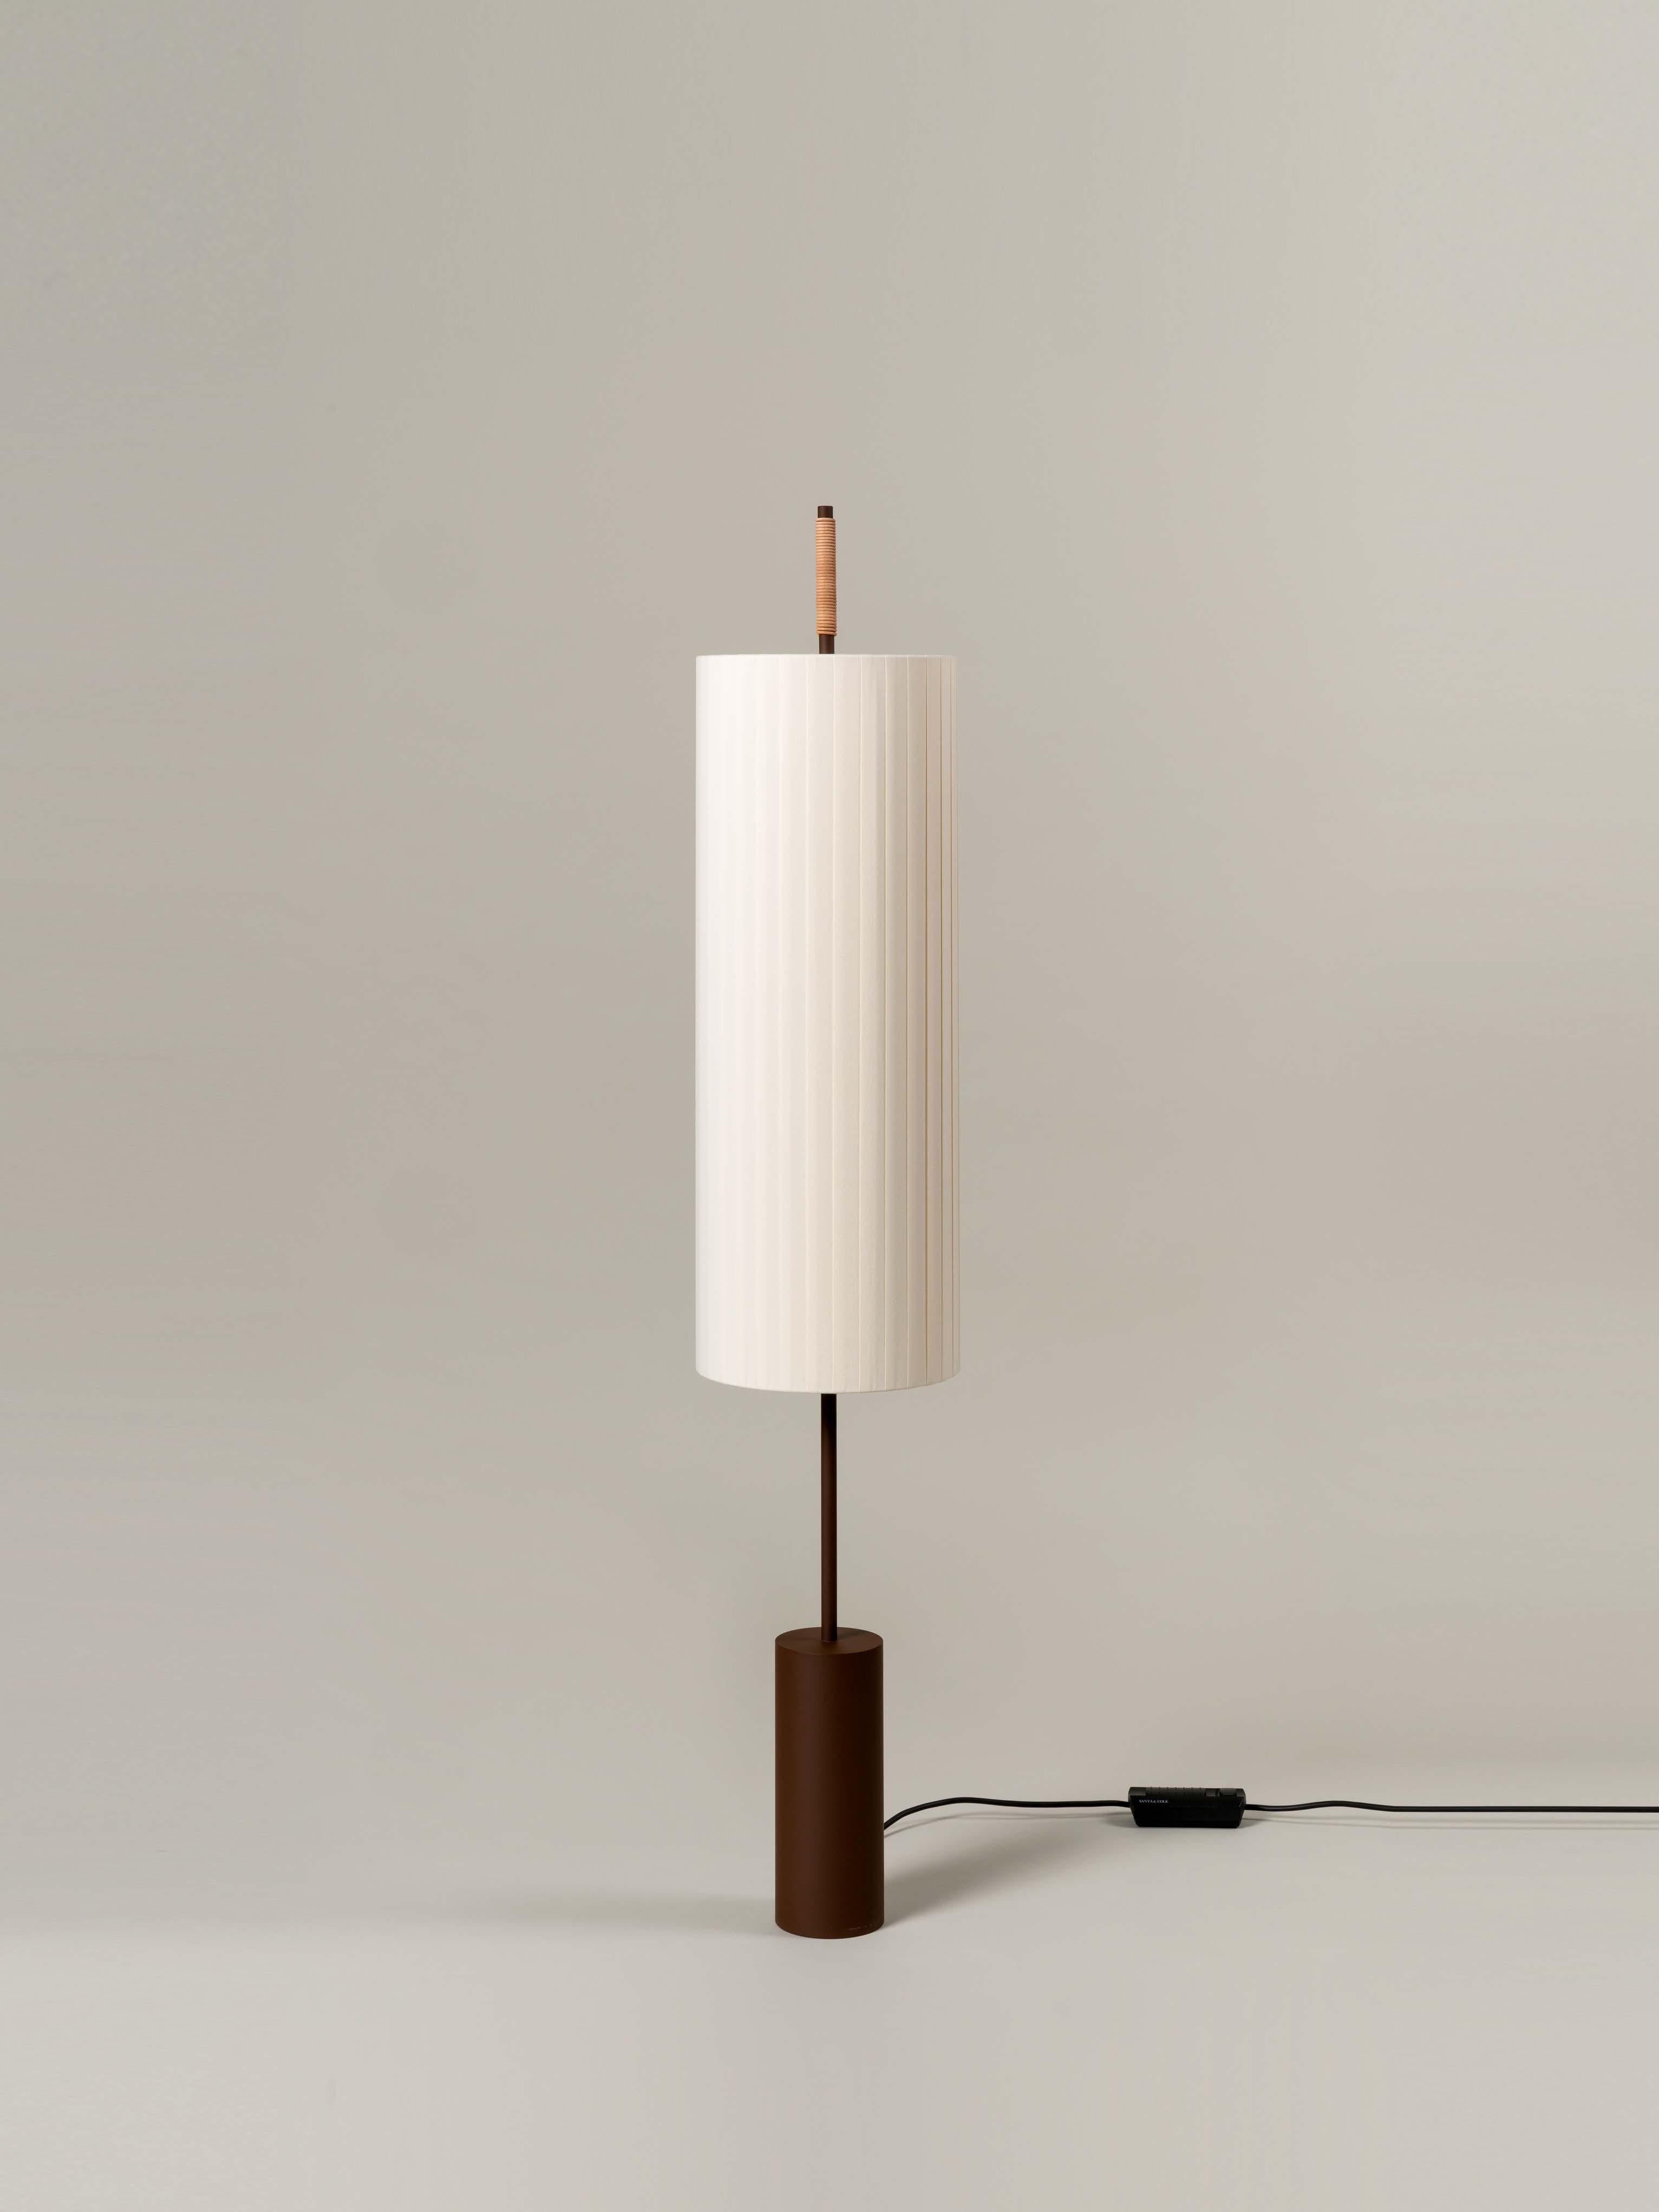 Dórica floor lamp by Jordi Miralbell, Mariona Raventós
Dimensions: D 28 x H 143 cm
Materials: Metal, ribbon.

The balance of materials that make up this lamp—its cotton shade, metallic structure and stitched leather grip—are a vindication of